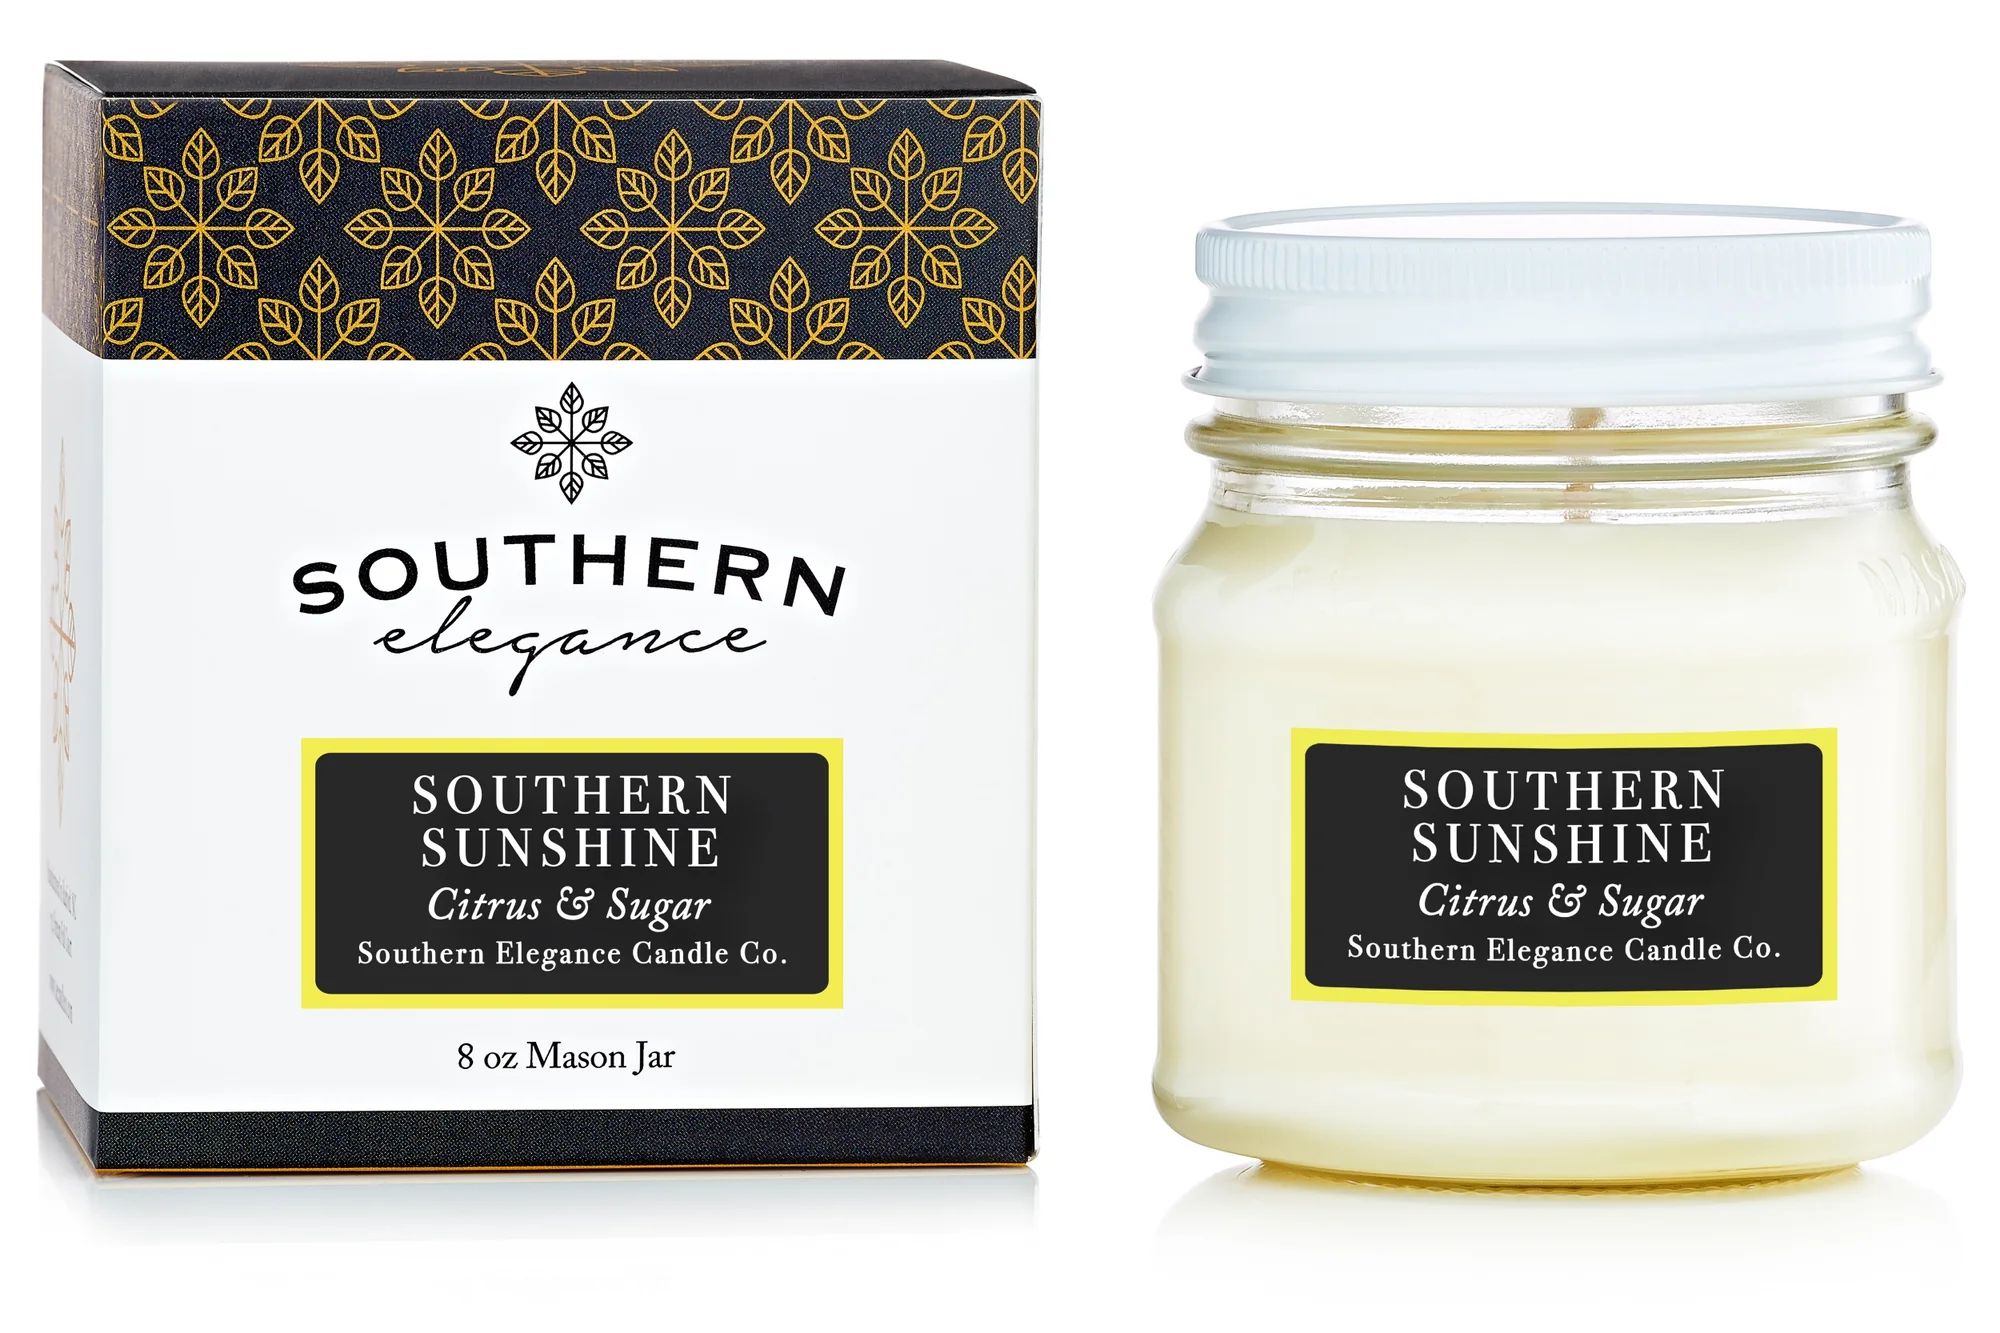 8 oz Mason Jar: All Signature Scents Candle Collection (Quick Order) | Southern Elegance Candle Company